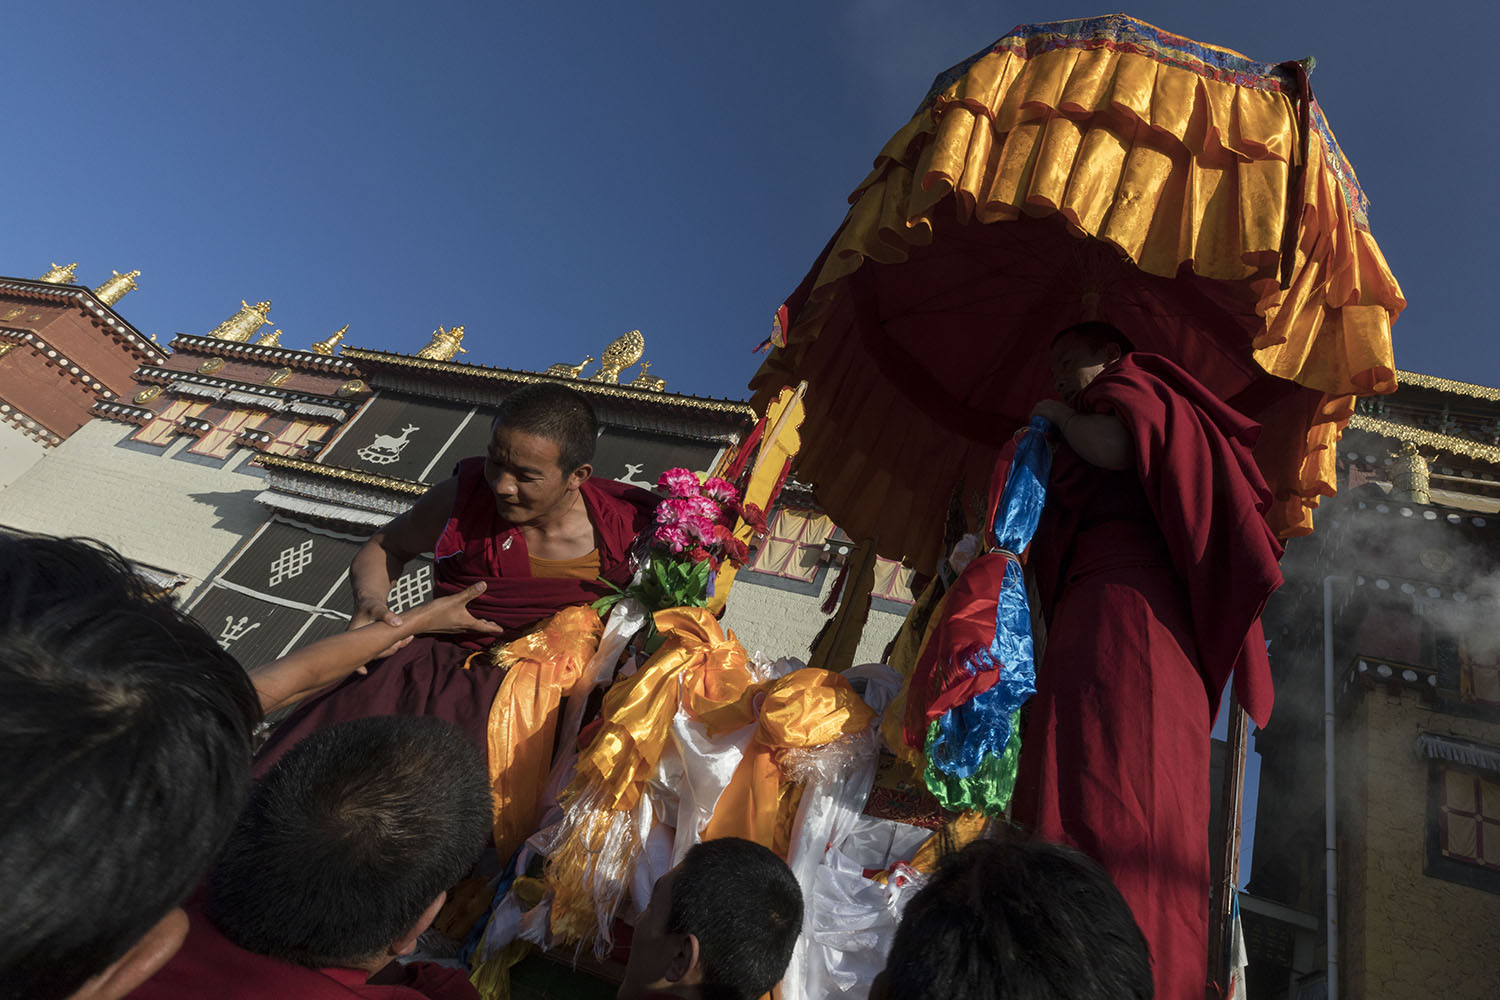 Tibetan Buddhist monks emerge from the monastery with a chatra that is carrying two monks, at SongZangLin Monastery in JingXiang Village. Yunnan, China. March 2, 2018.